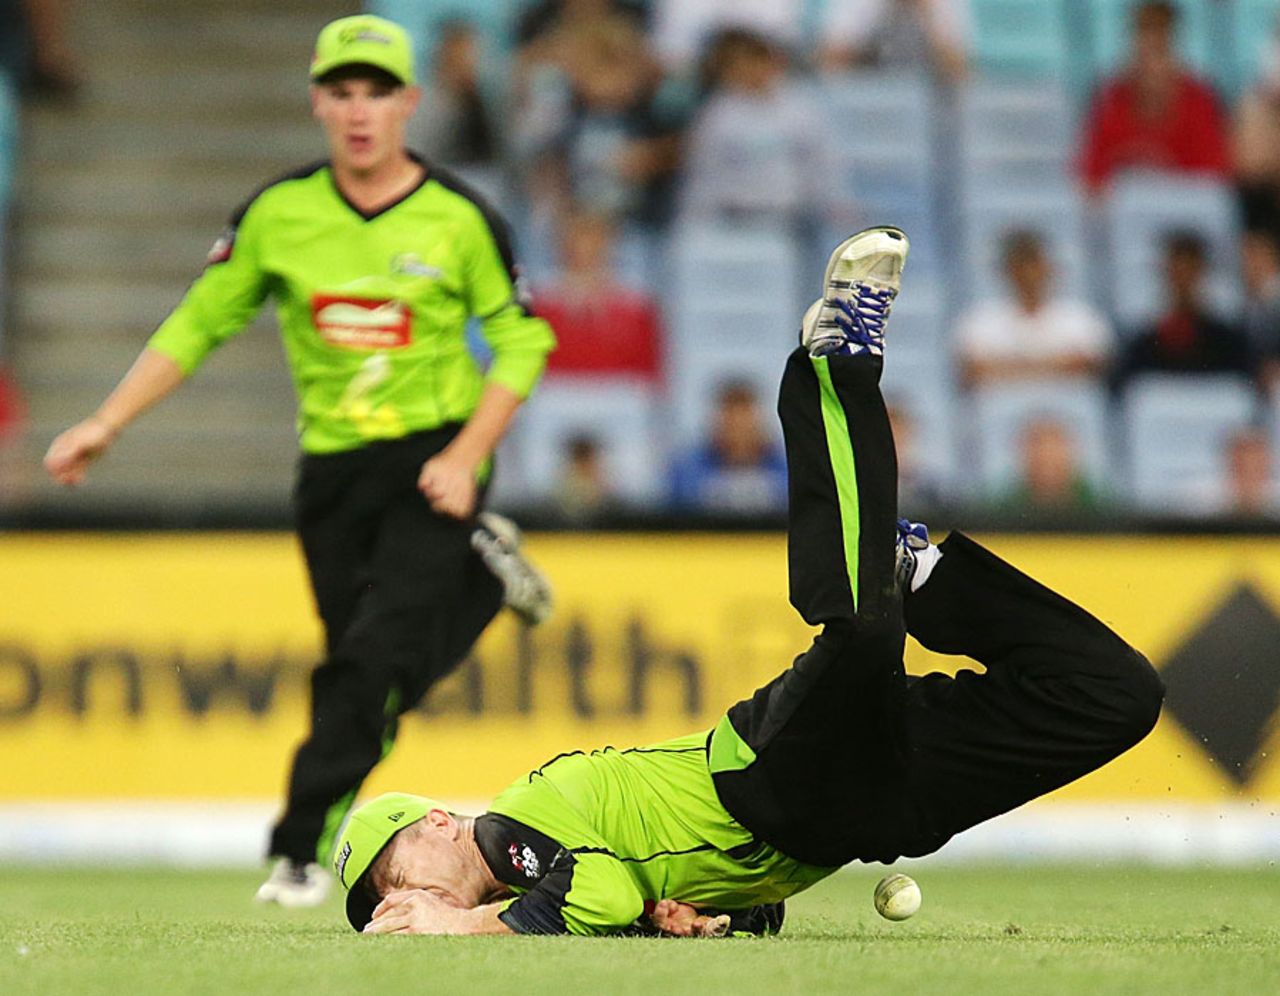 Chris Rogers tumbles onto the ground after missing a catch, Sydney Thunder v Adelaide Strikers, Big Bash League, December 20, 2012